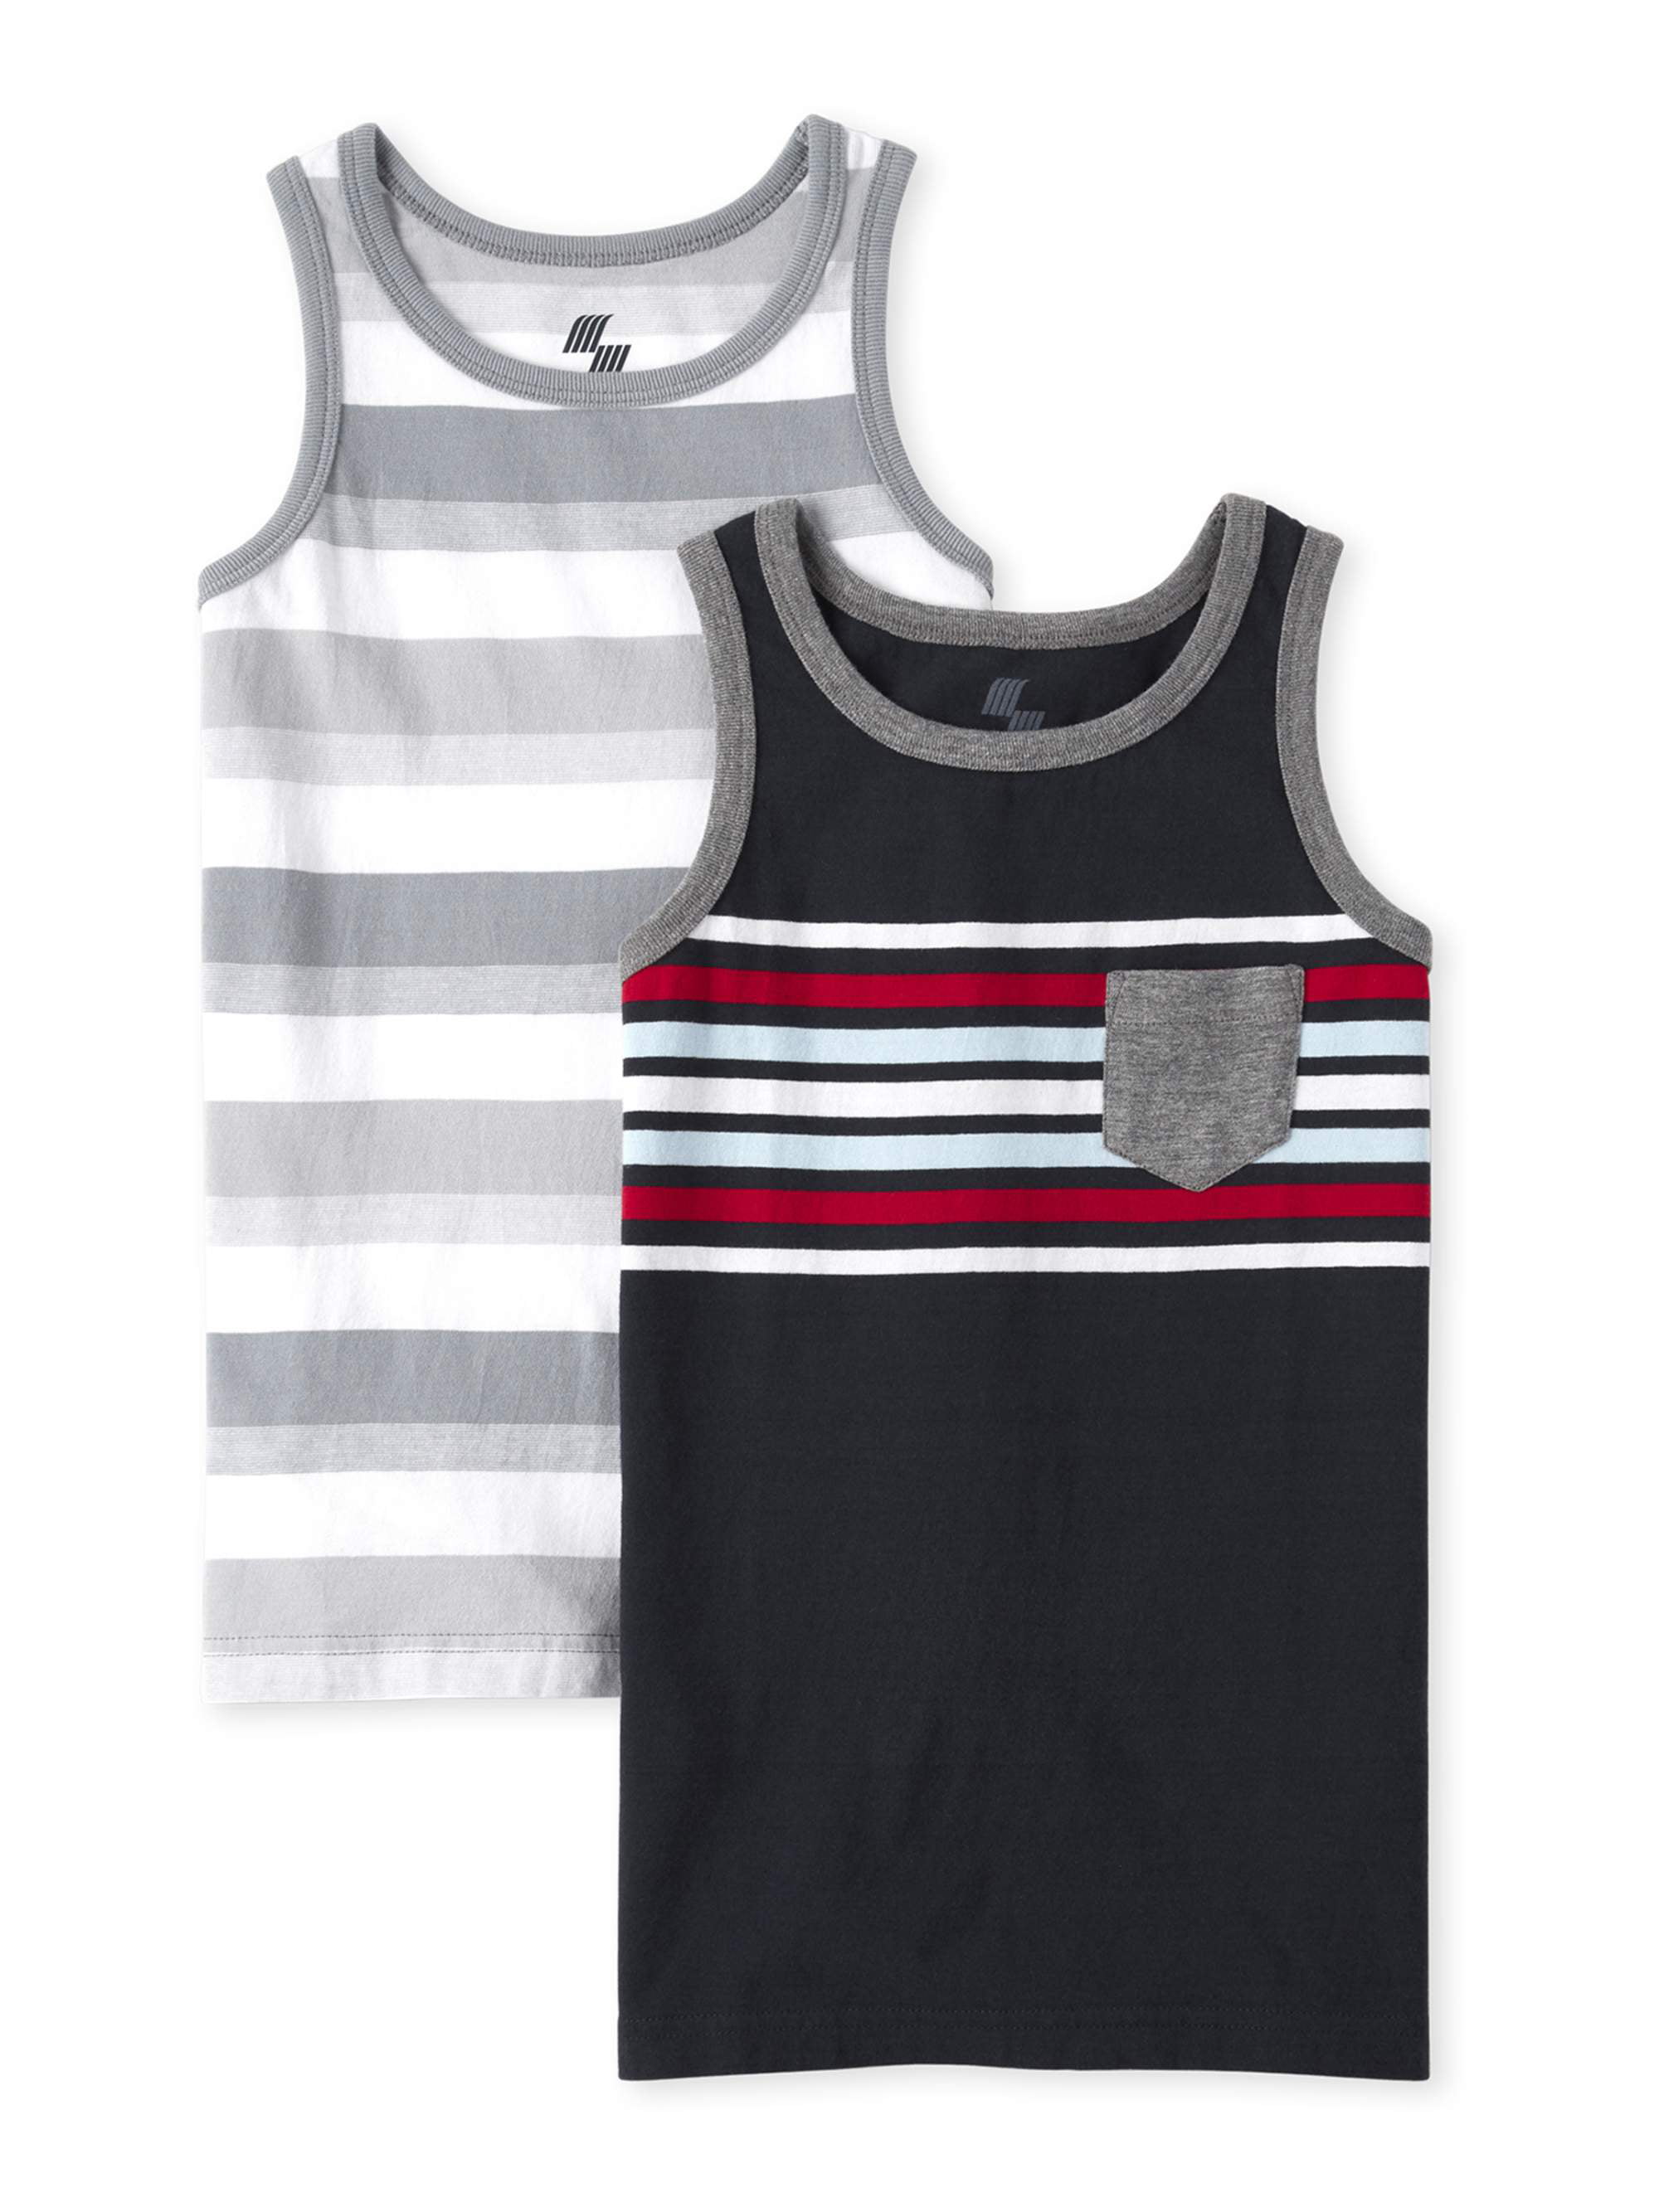 The Childrens Place Boys Americana Tank Top